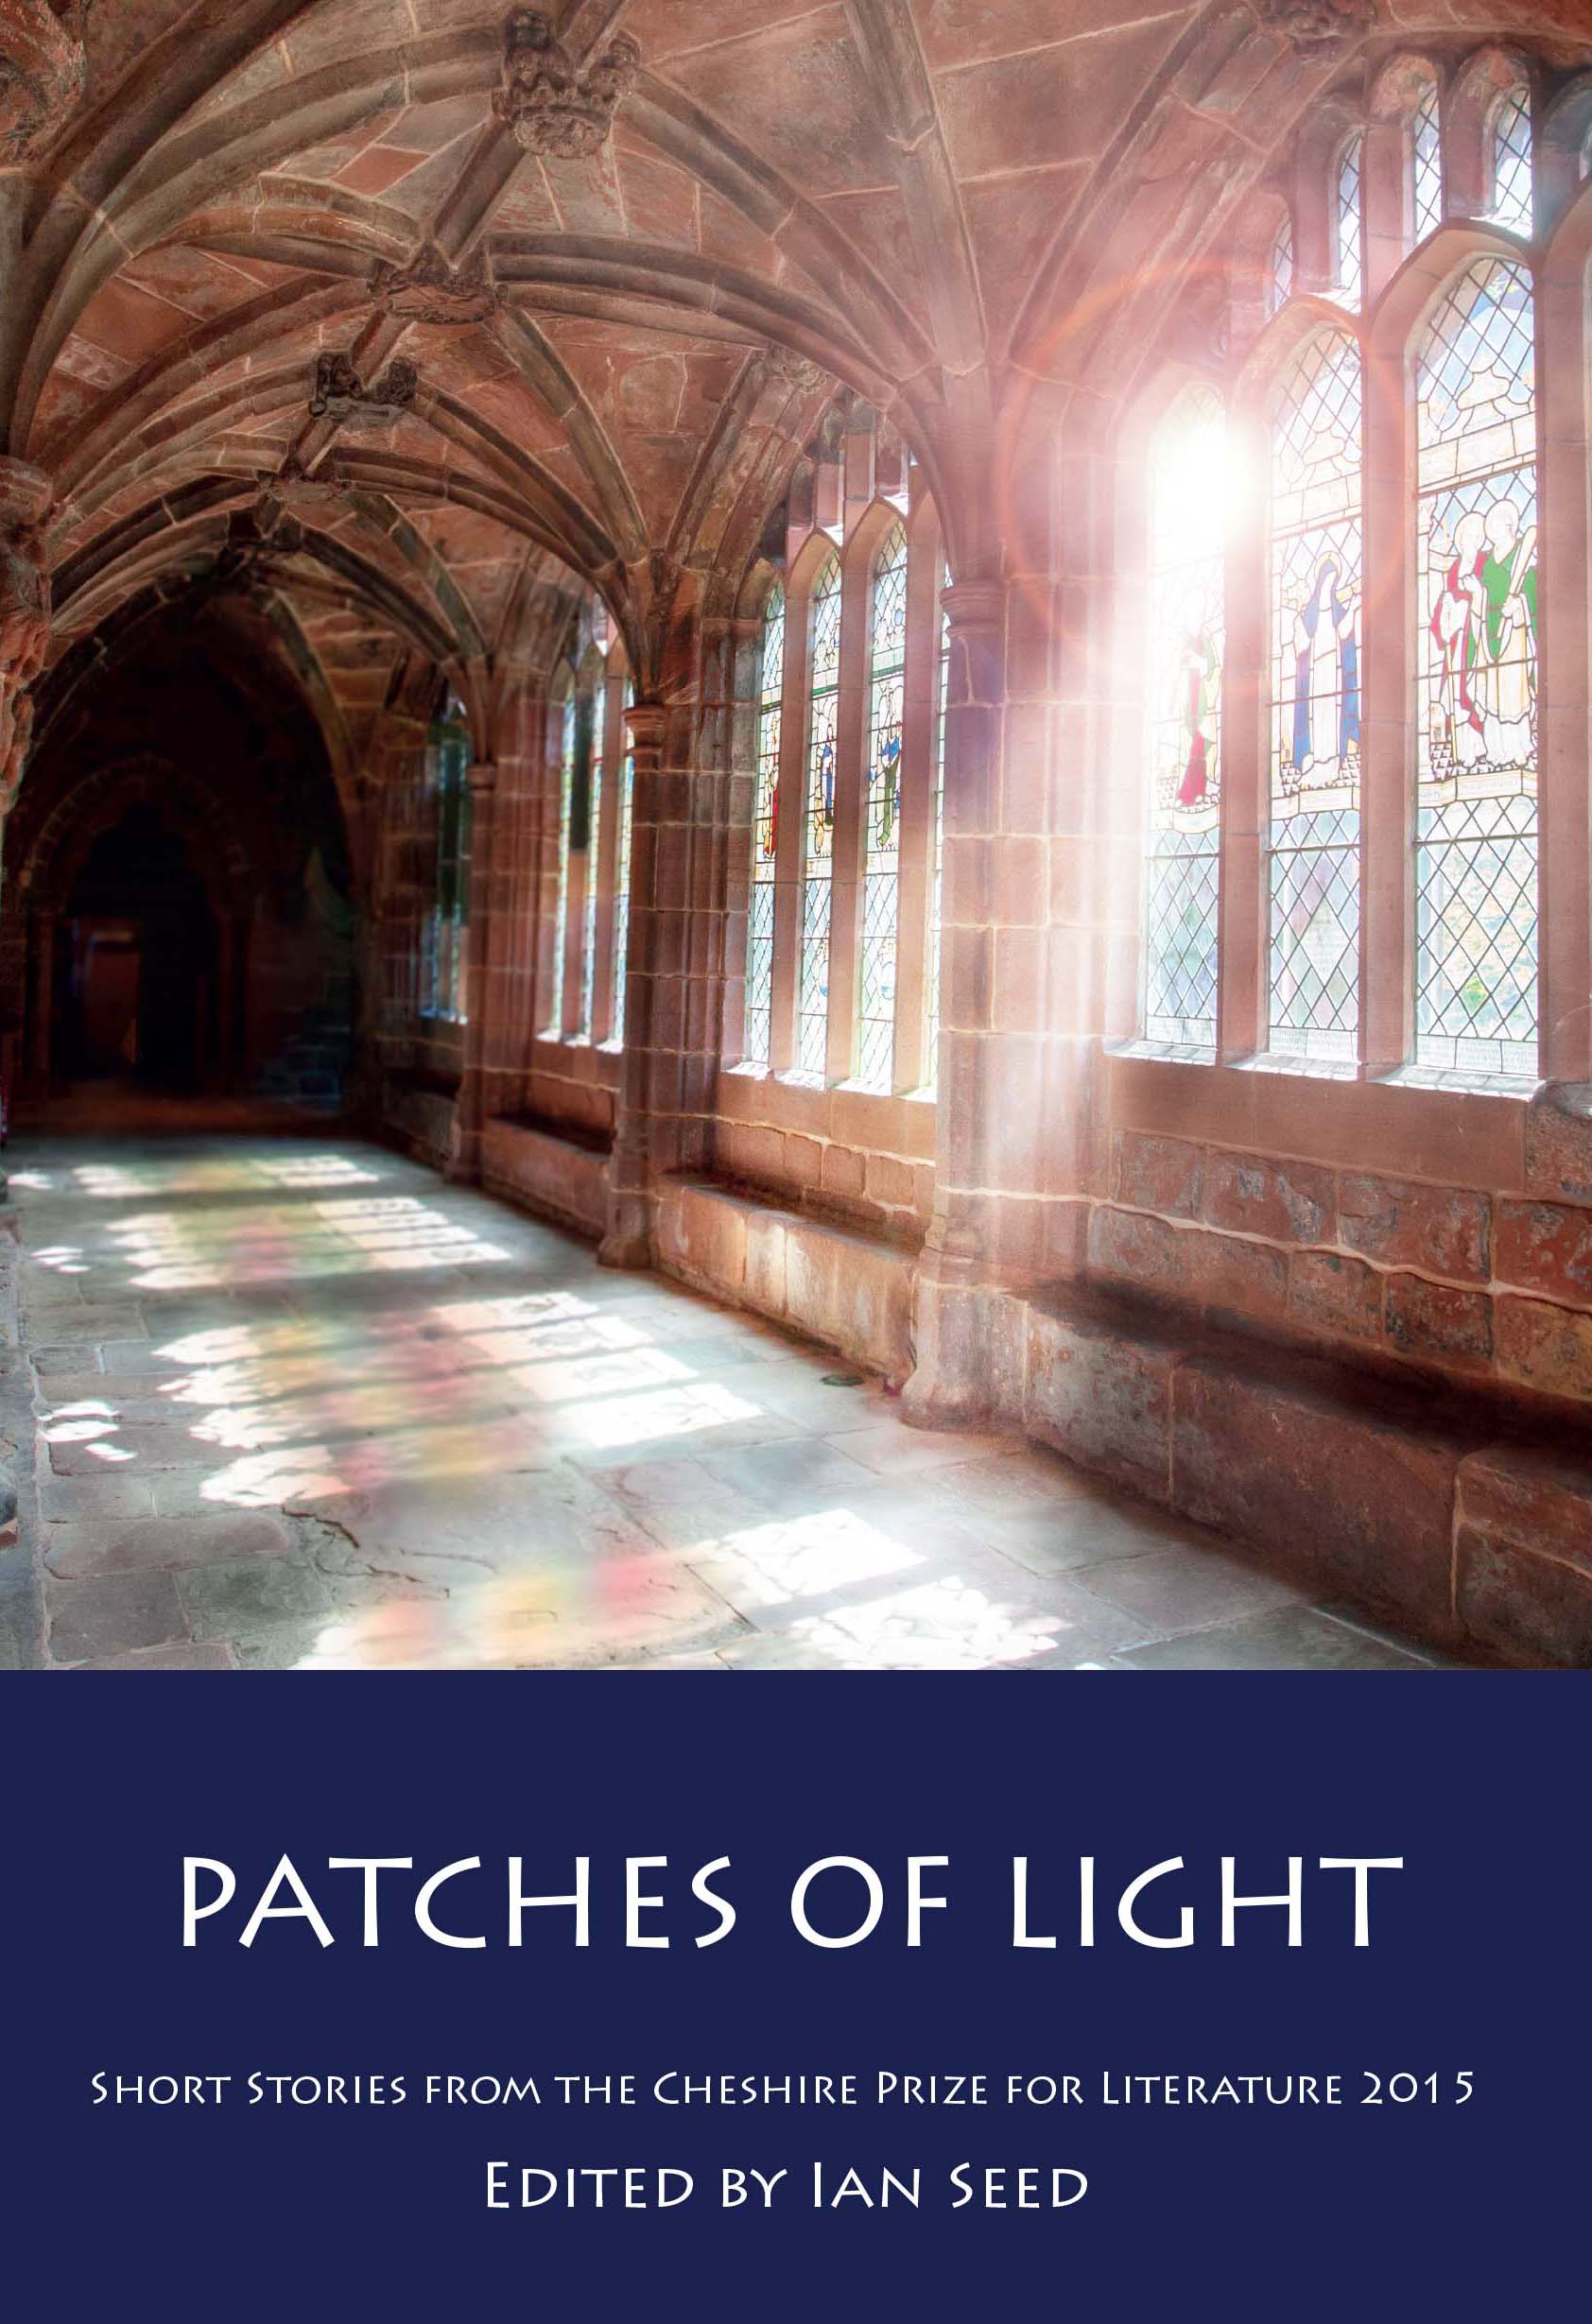 Patches of Light - Short Stories from the Cheshire Prize for Literature 2015